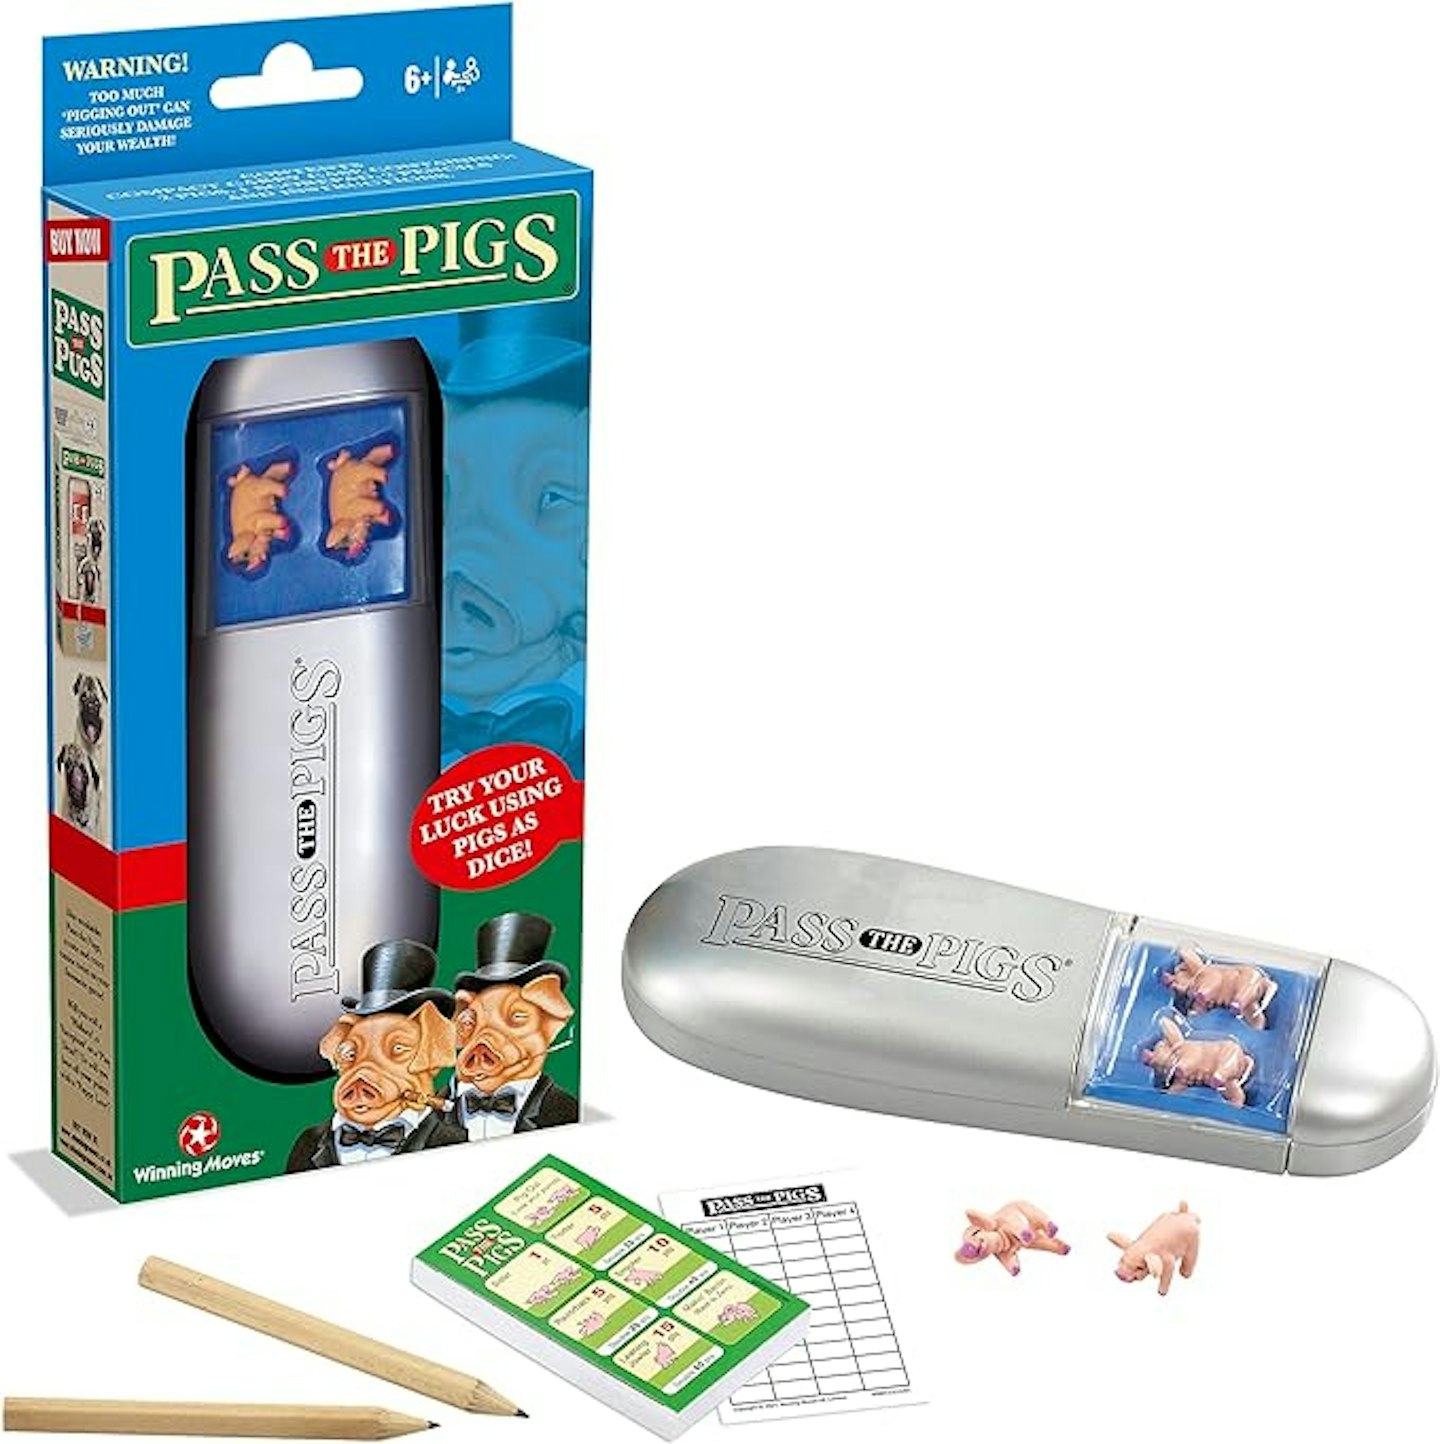 Pass the Pigs dice game box contents